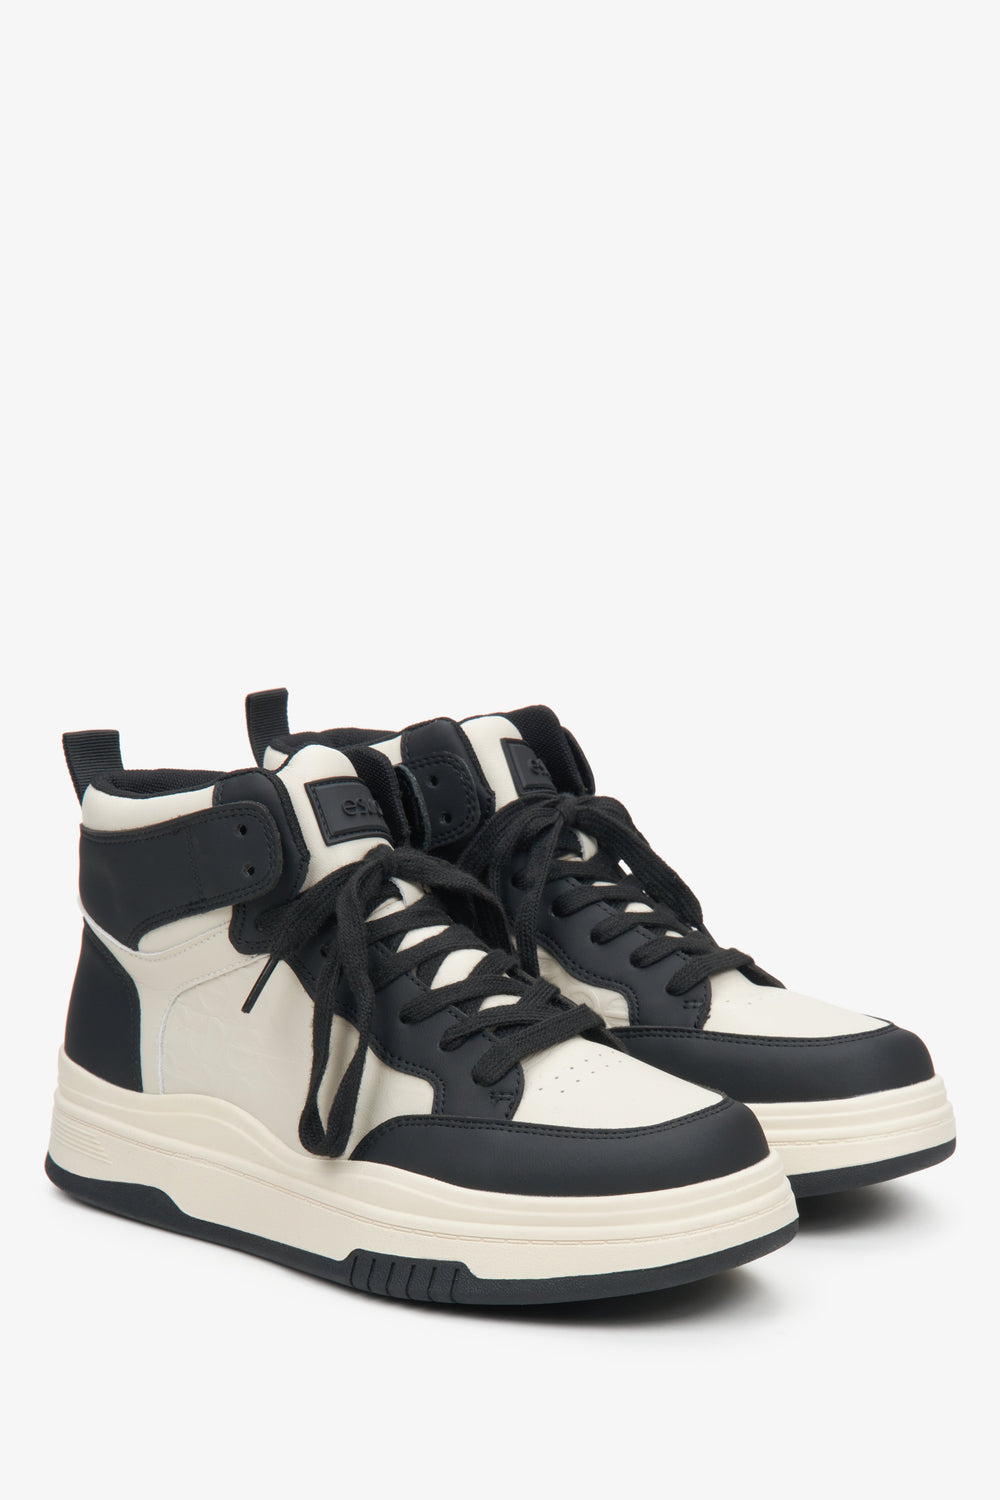 Leather high-top women's sneakers by Estro in beige-black color.